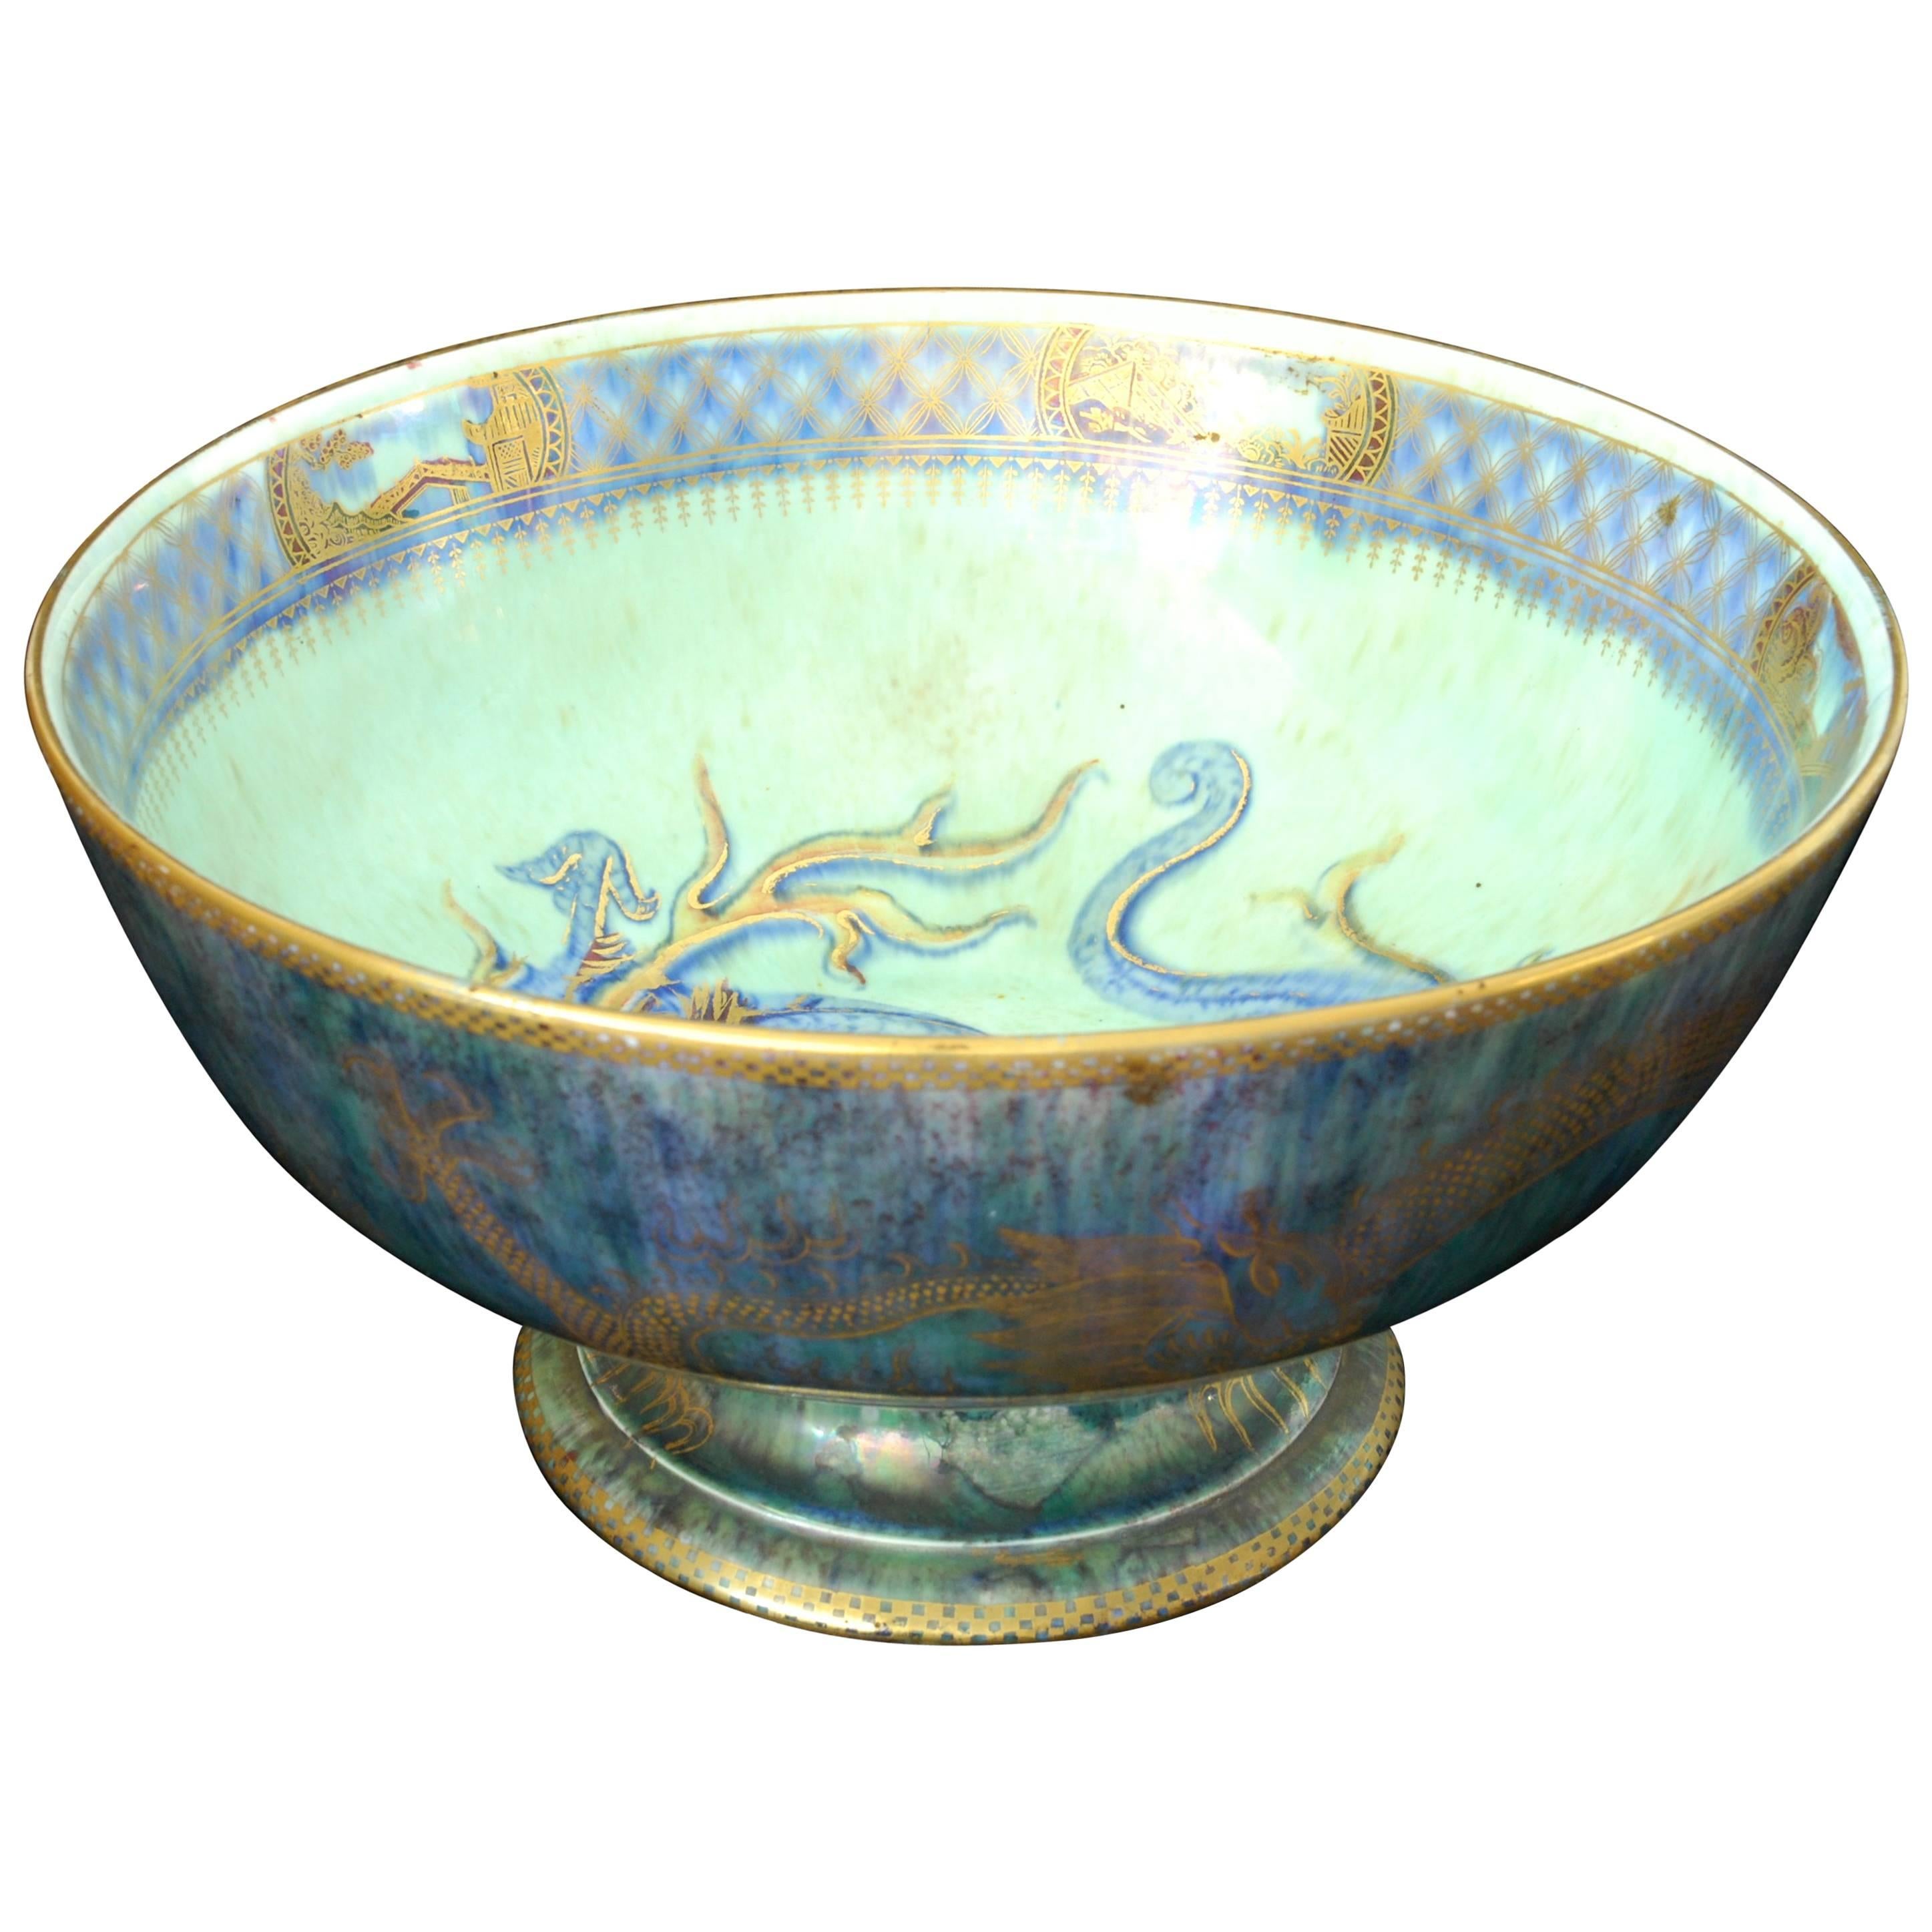 Lustre Punch Bowl with Dragons, Wedgwood, circa 1925